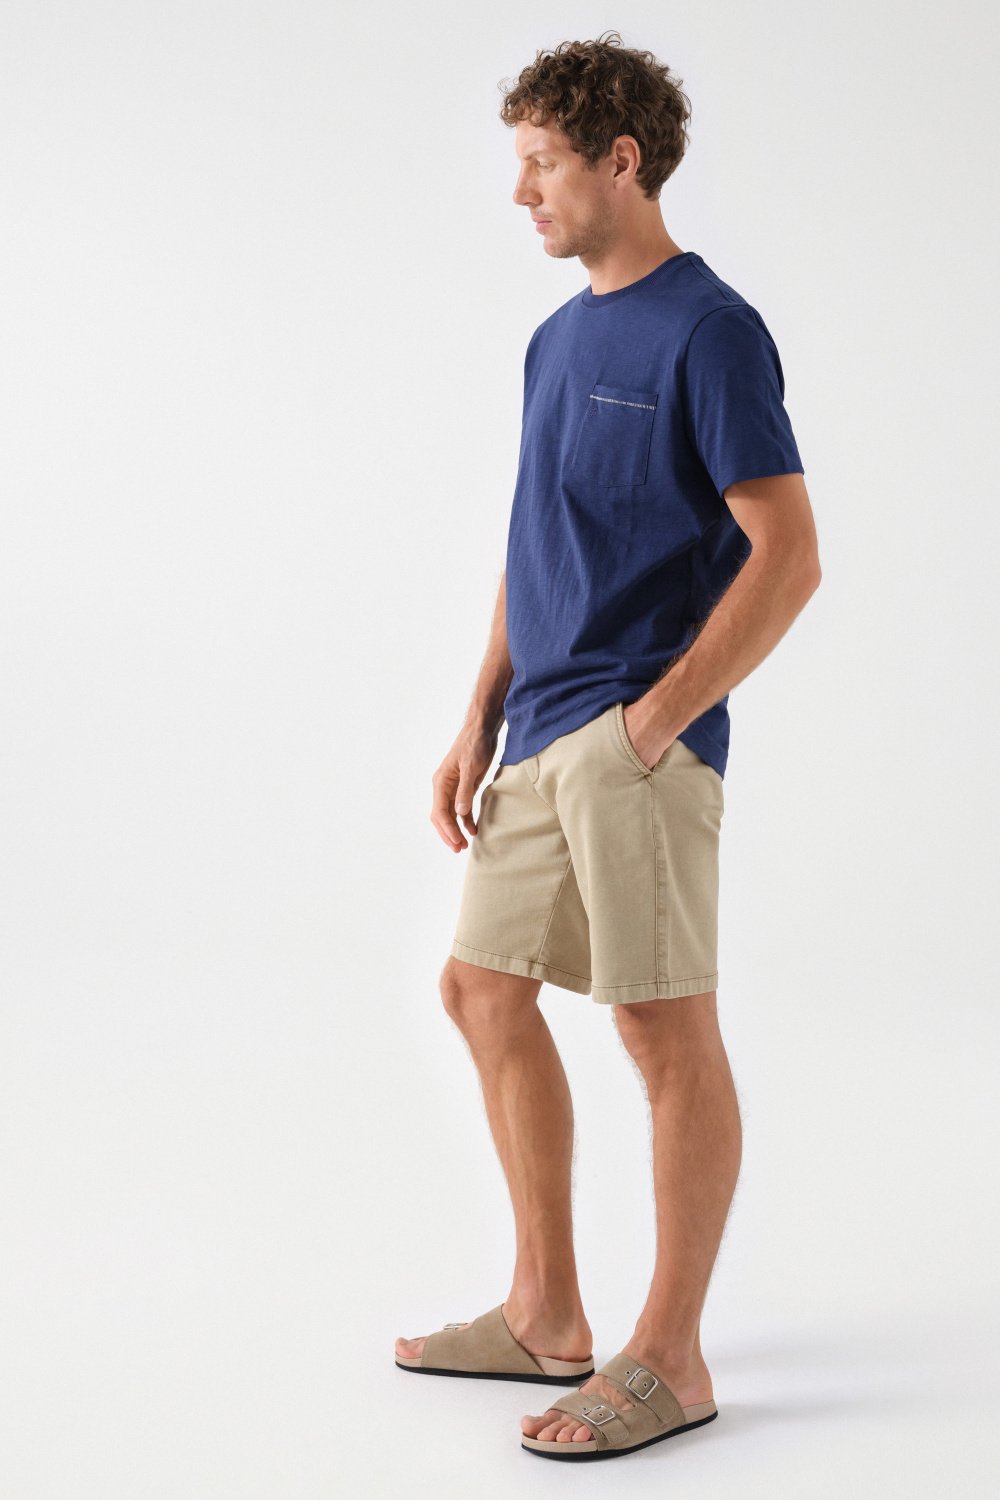 T-SHIRT WITH POCKET AND STRIPE DETAIL - Salsa